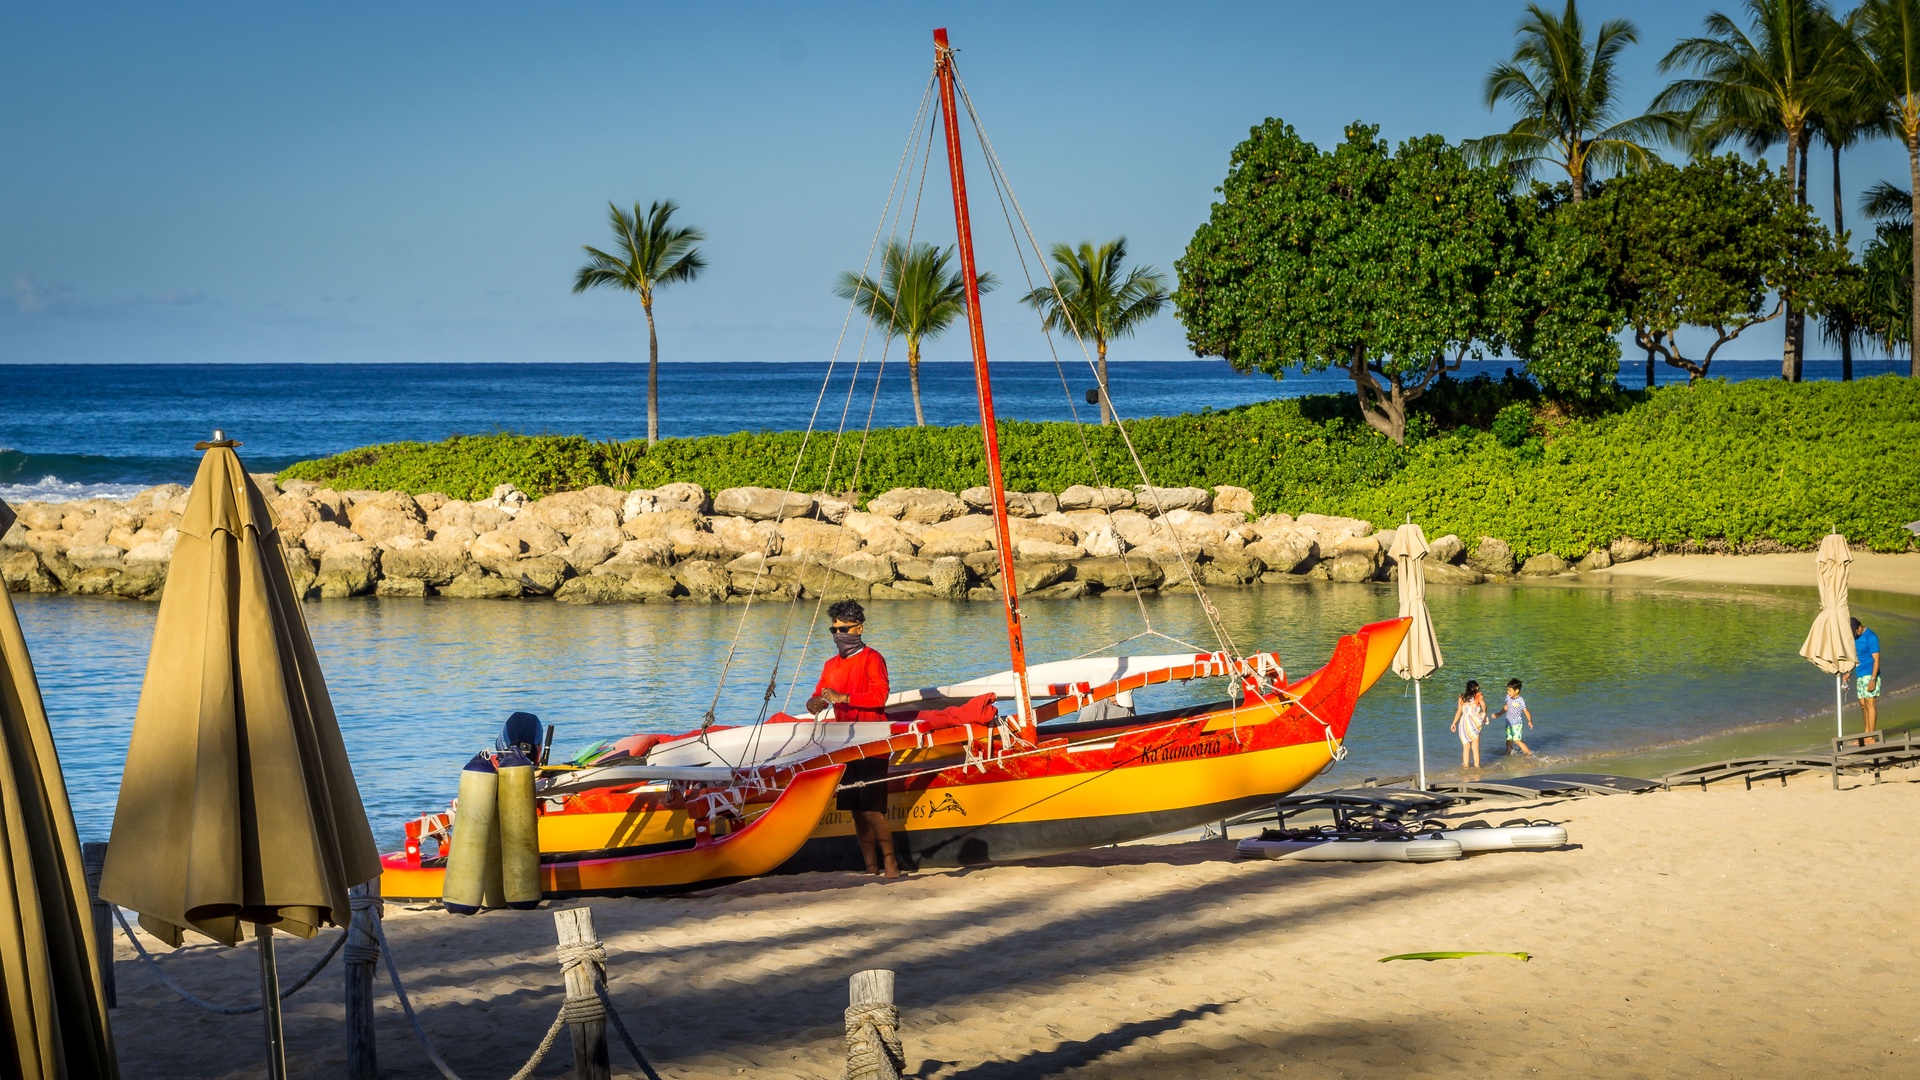 Kapolei Vacation Rentals, Coconut Plantation 1234-2 - Set sail on new adventures with boating, snorkeling and golfing.